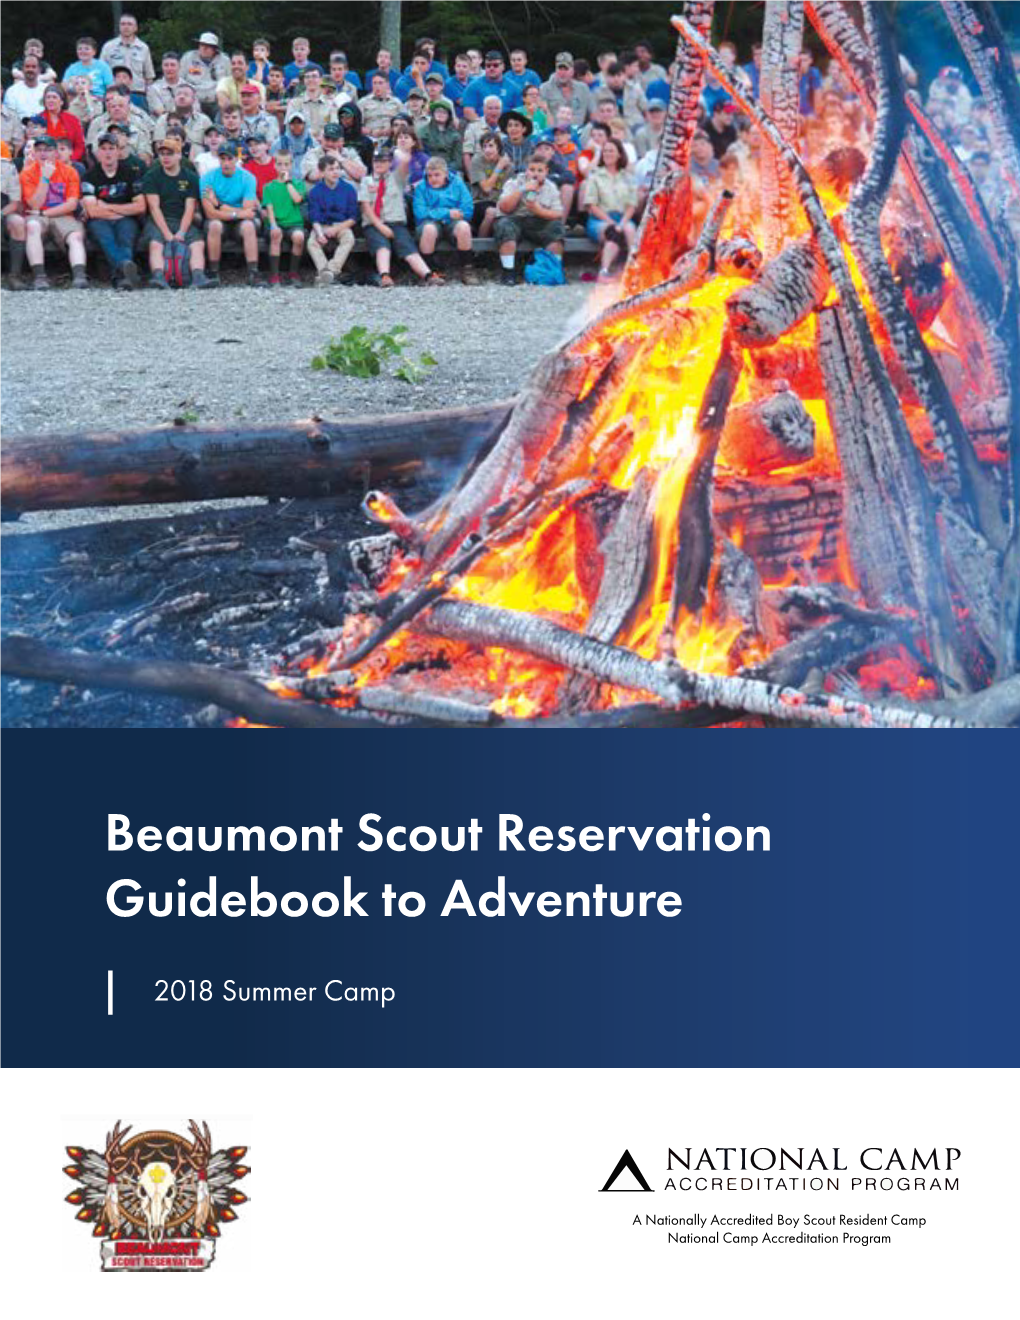 Beaumont Scout Reservation Guidebook to Adventure